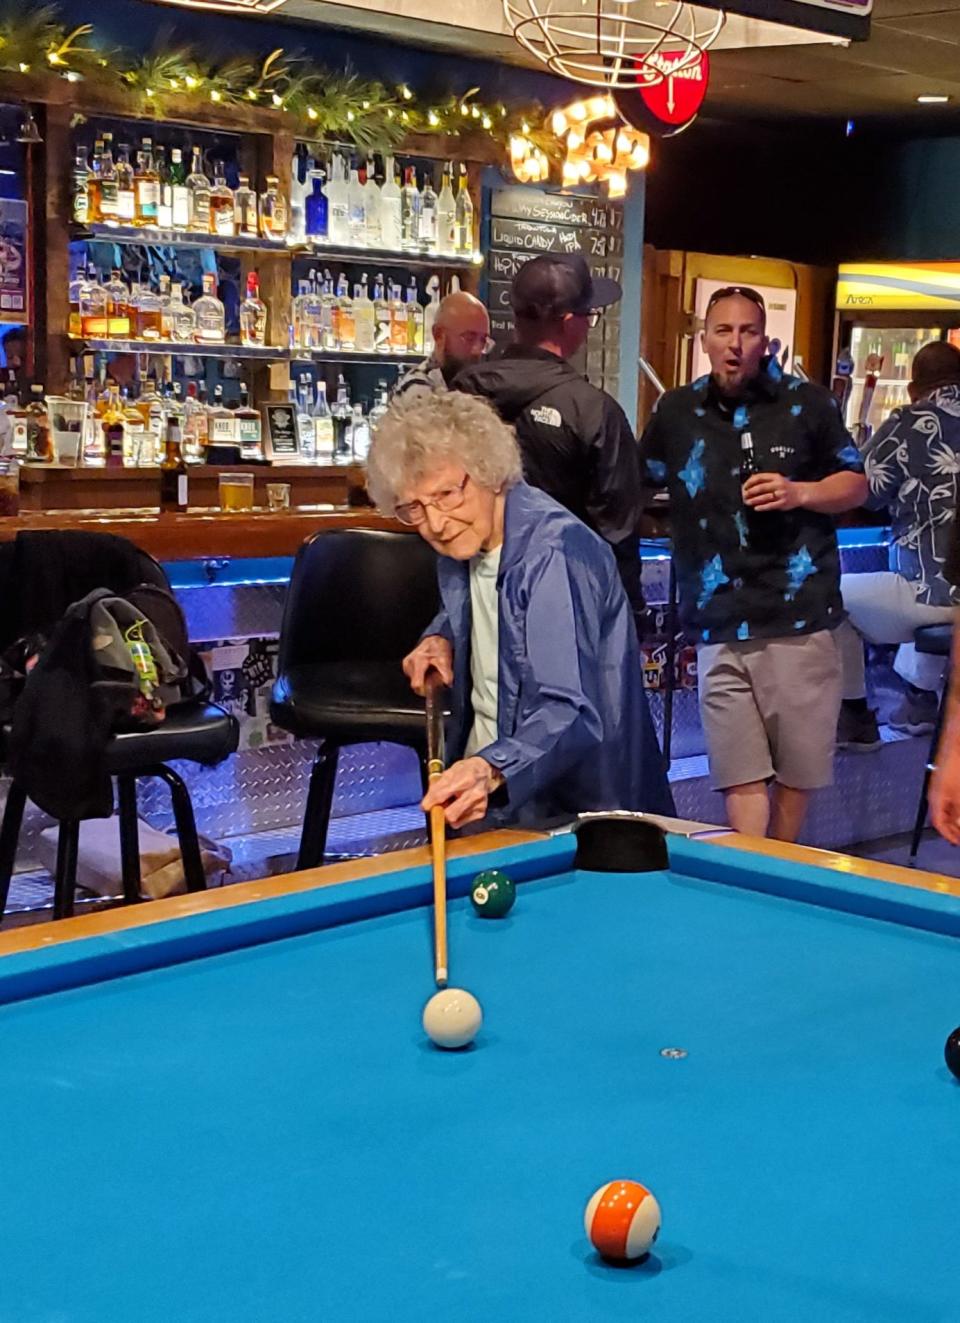 Teresina Piano plays pool at The Garage in 2022, shortly before she turned 105.